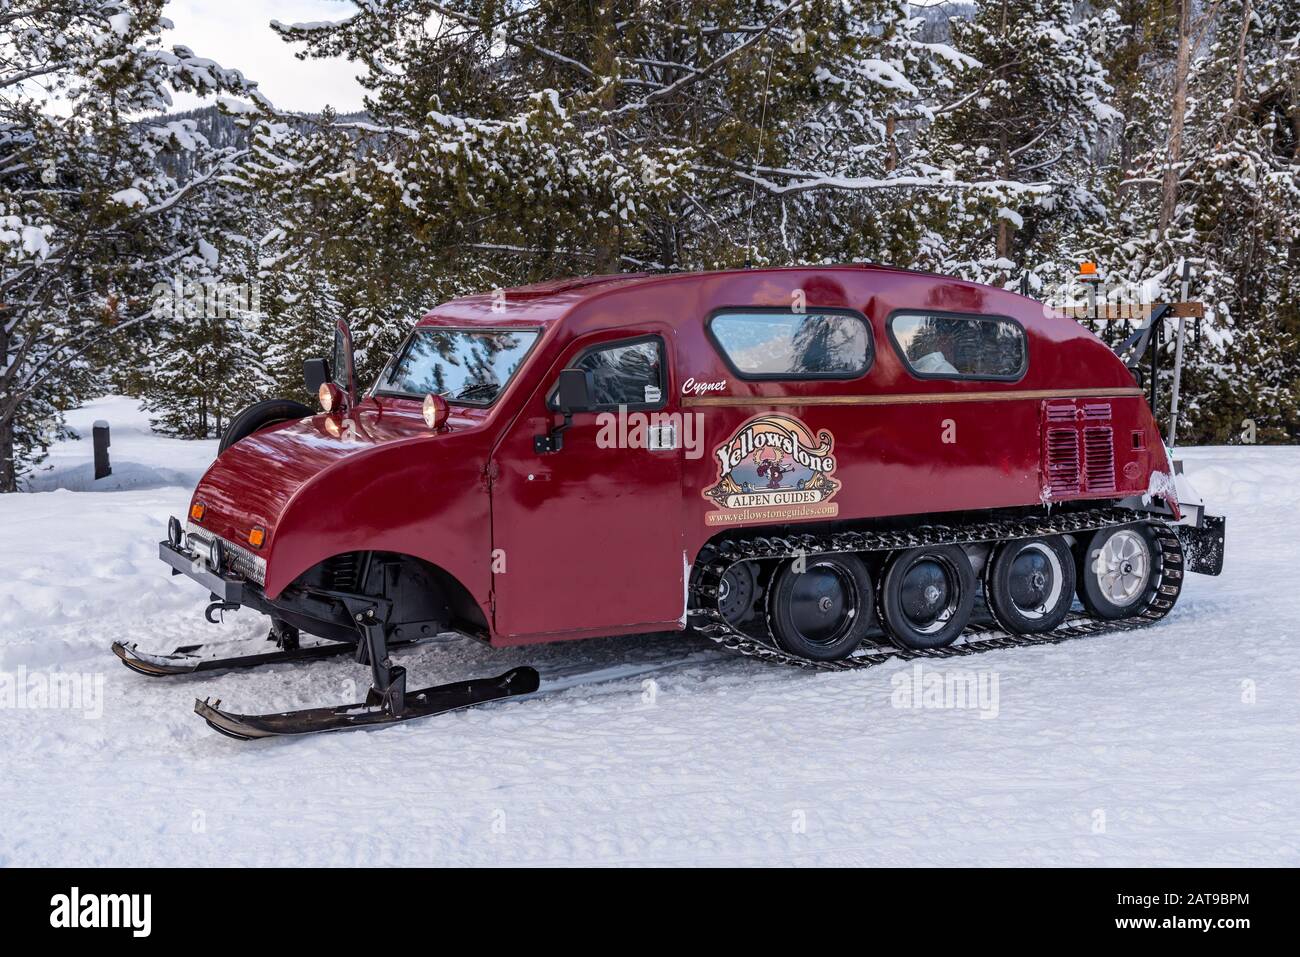 A Bombardier vehicle fitted to travel in winter snow. Yellowstone National Park, Wyoming, USA Stock Photo